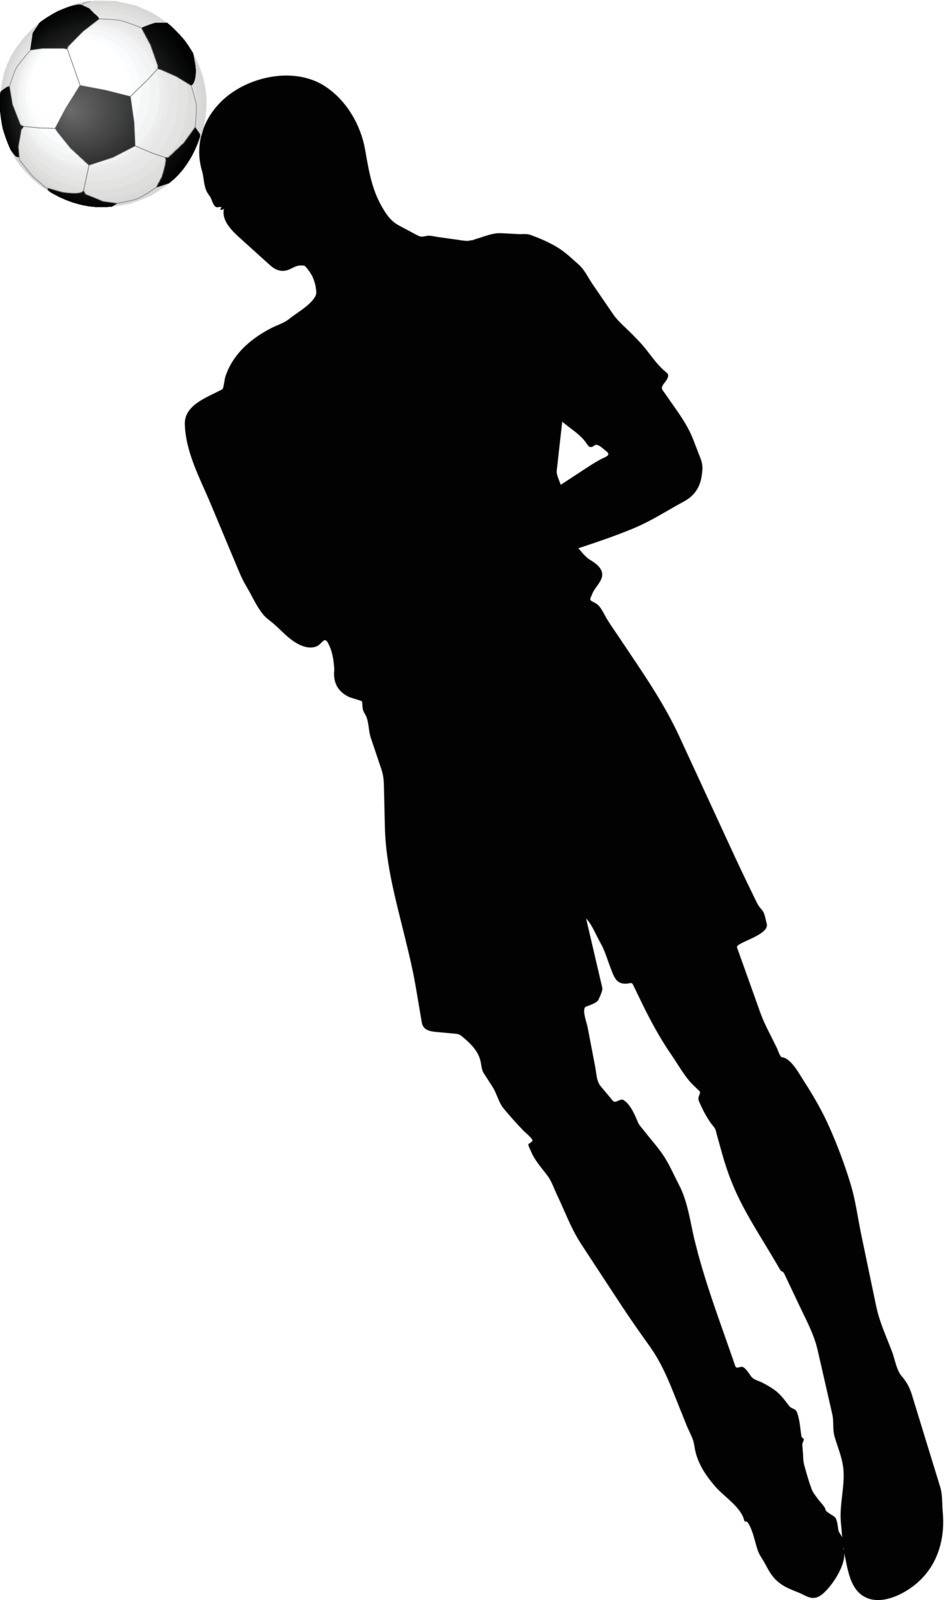 isolated poses of soccer players silhouettes in head strike position